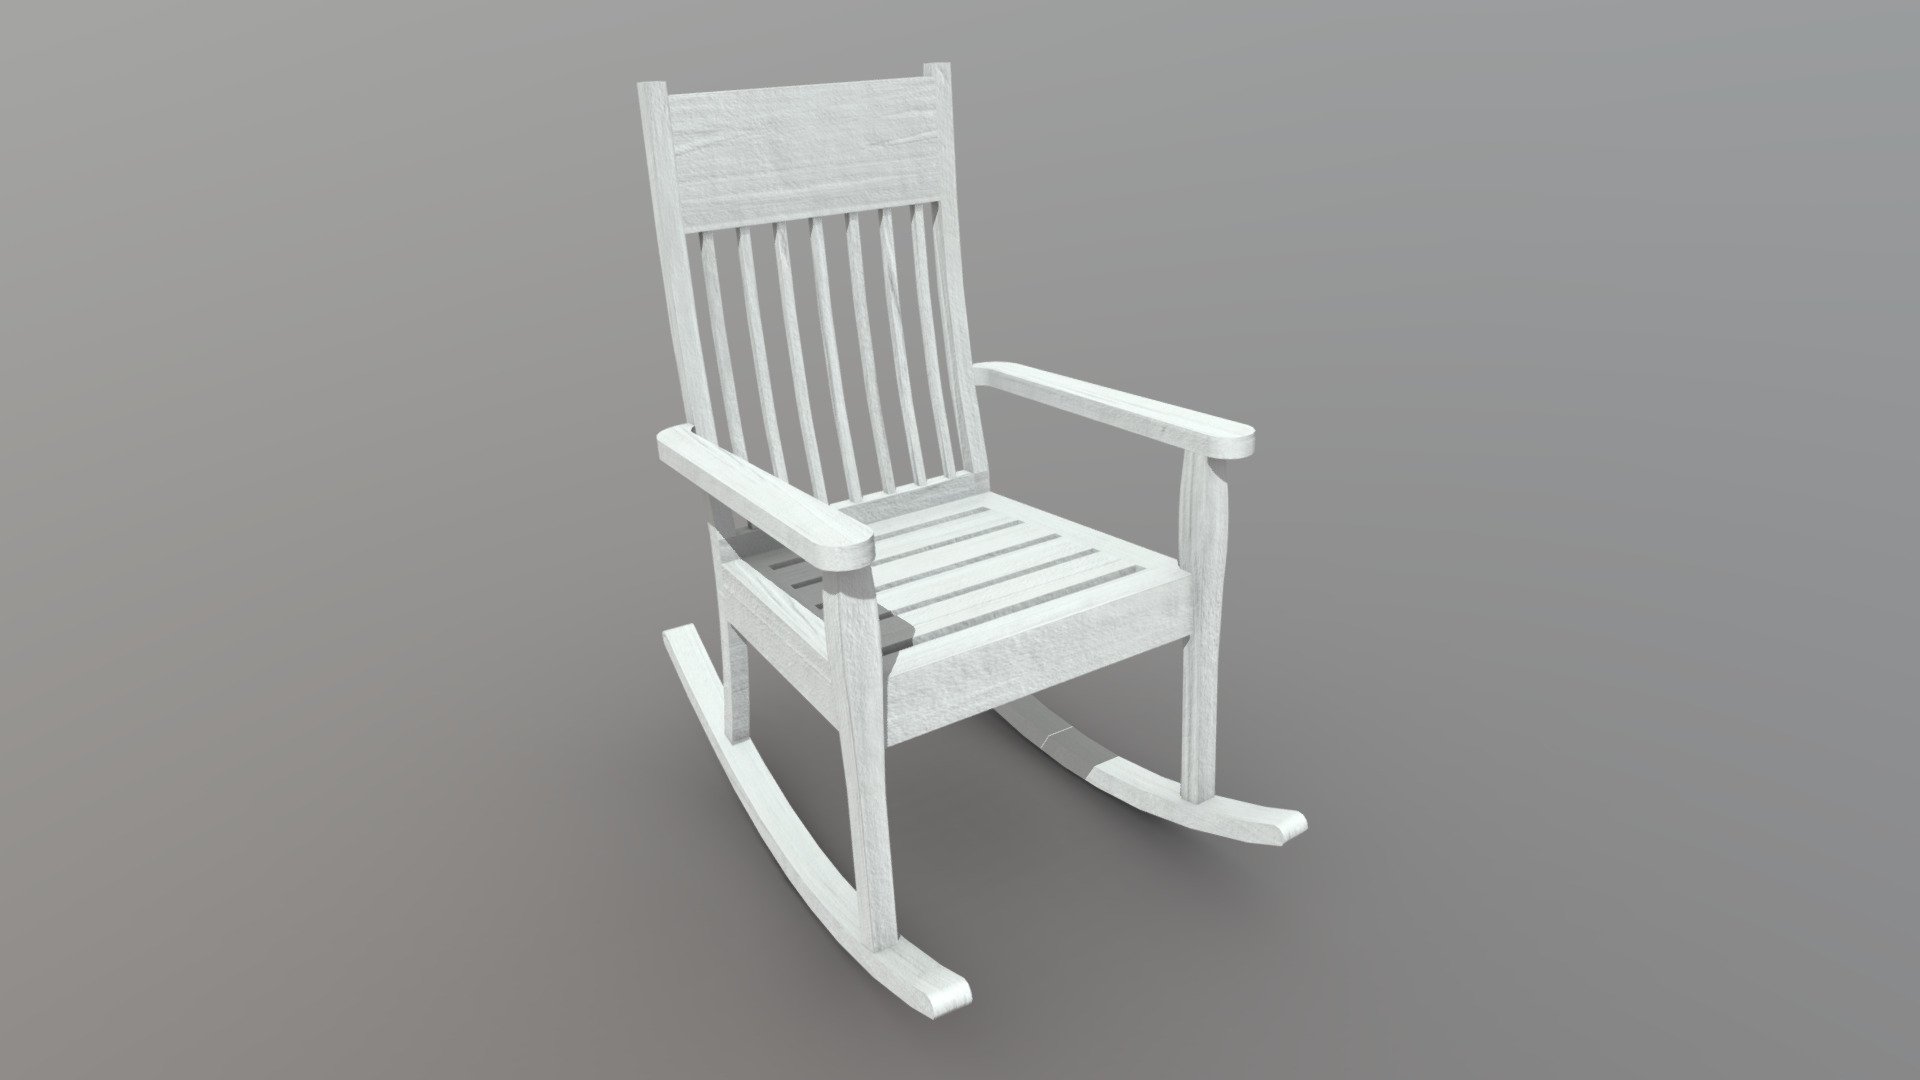 ‘Take some white oak wood to get a nice rocking chair and smell the good times.’ Includes x2048 PBR textures.

If you need help with this model or have a question – please do not hesitate to contact with me. I will be happy to help you.

Contact: plaggy.net@gmail.com - Rocking Chair 1 - Buy Royalty Free 3D model by plaggy 3d model